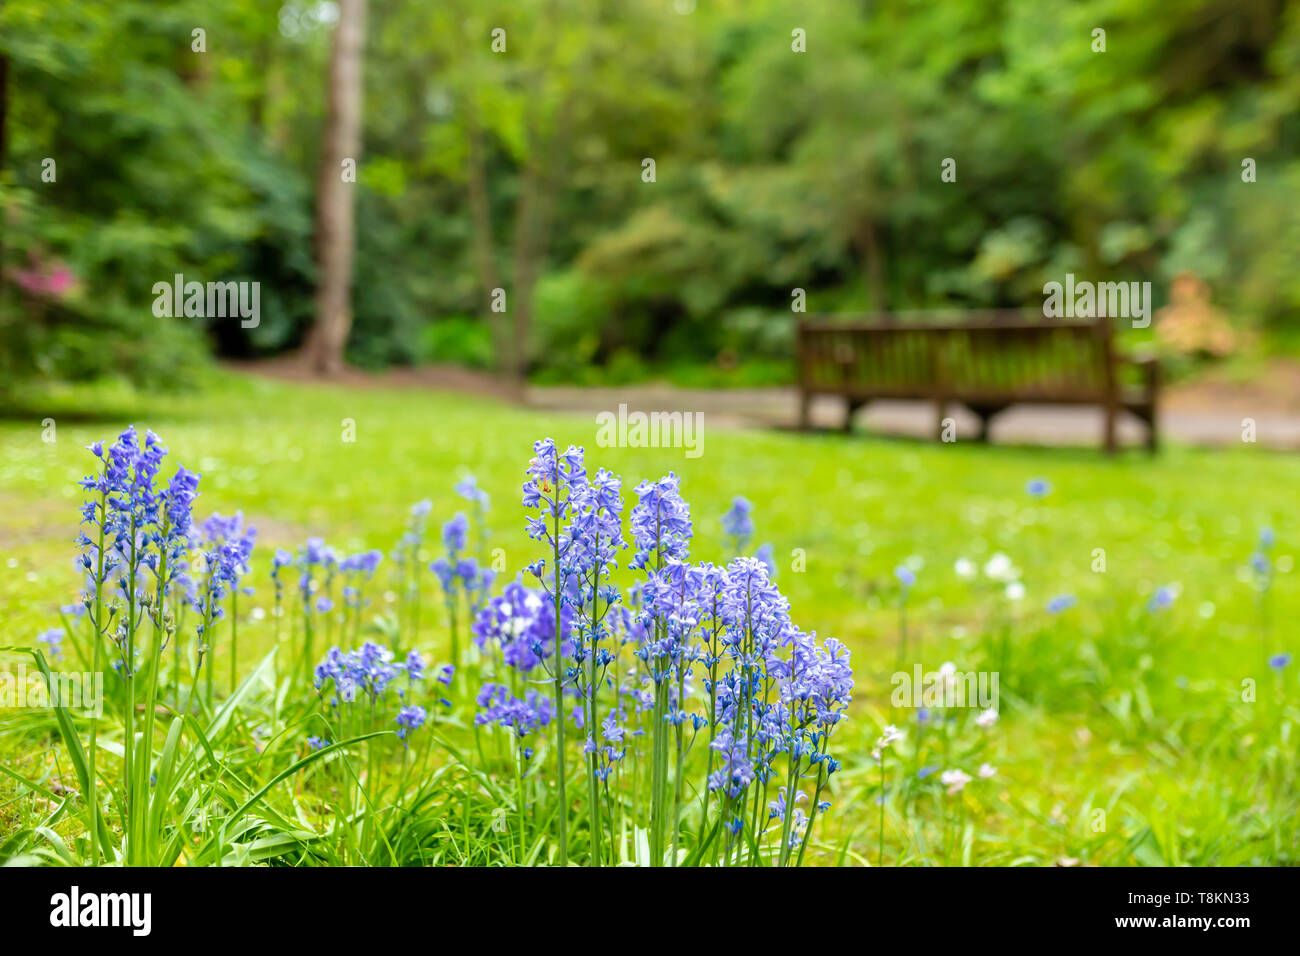 Colour landscape photograph of a type of spanish bluebell's in focus in foreground with park bench in background. Branksome chine, Poole, Dorset, Engl Stock Photo